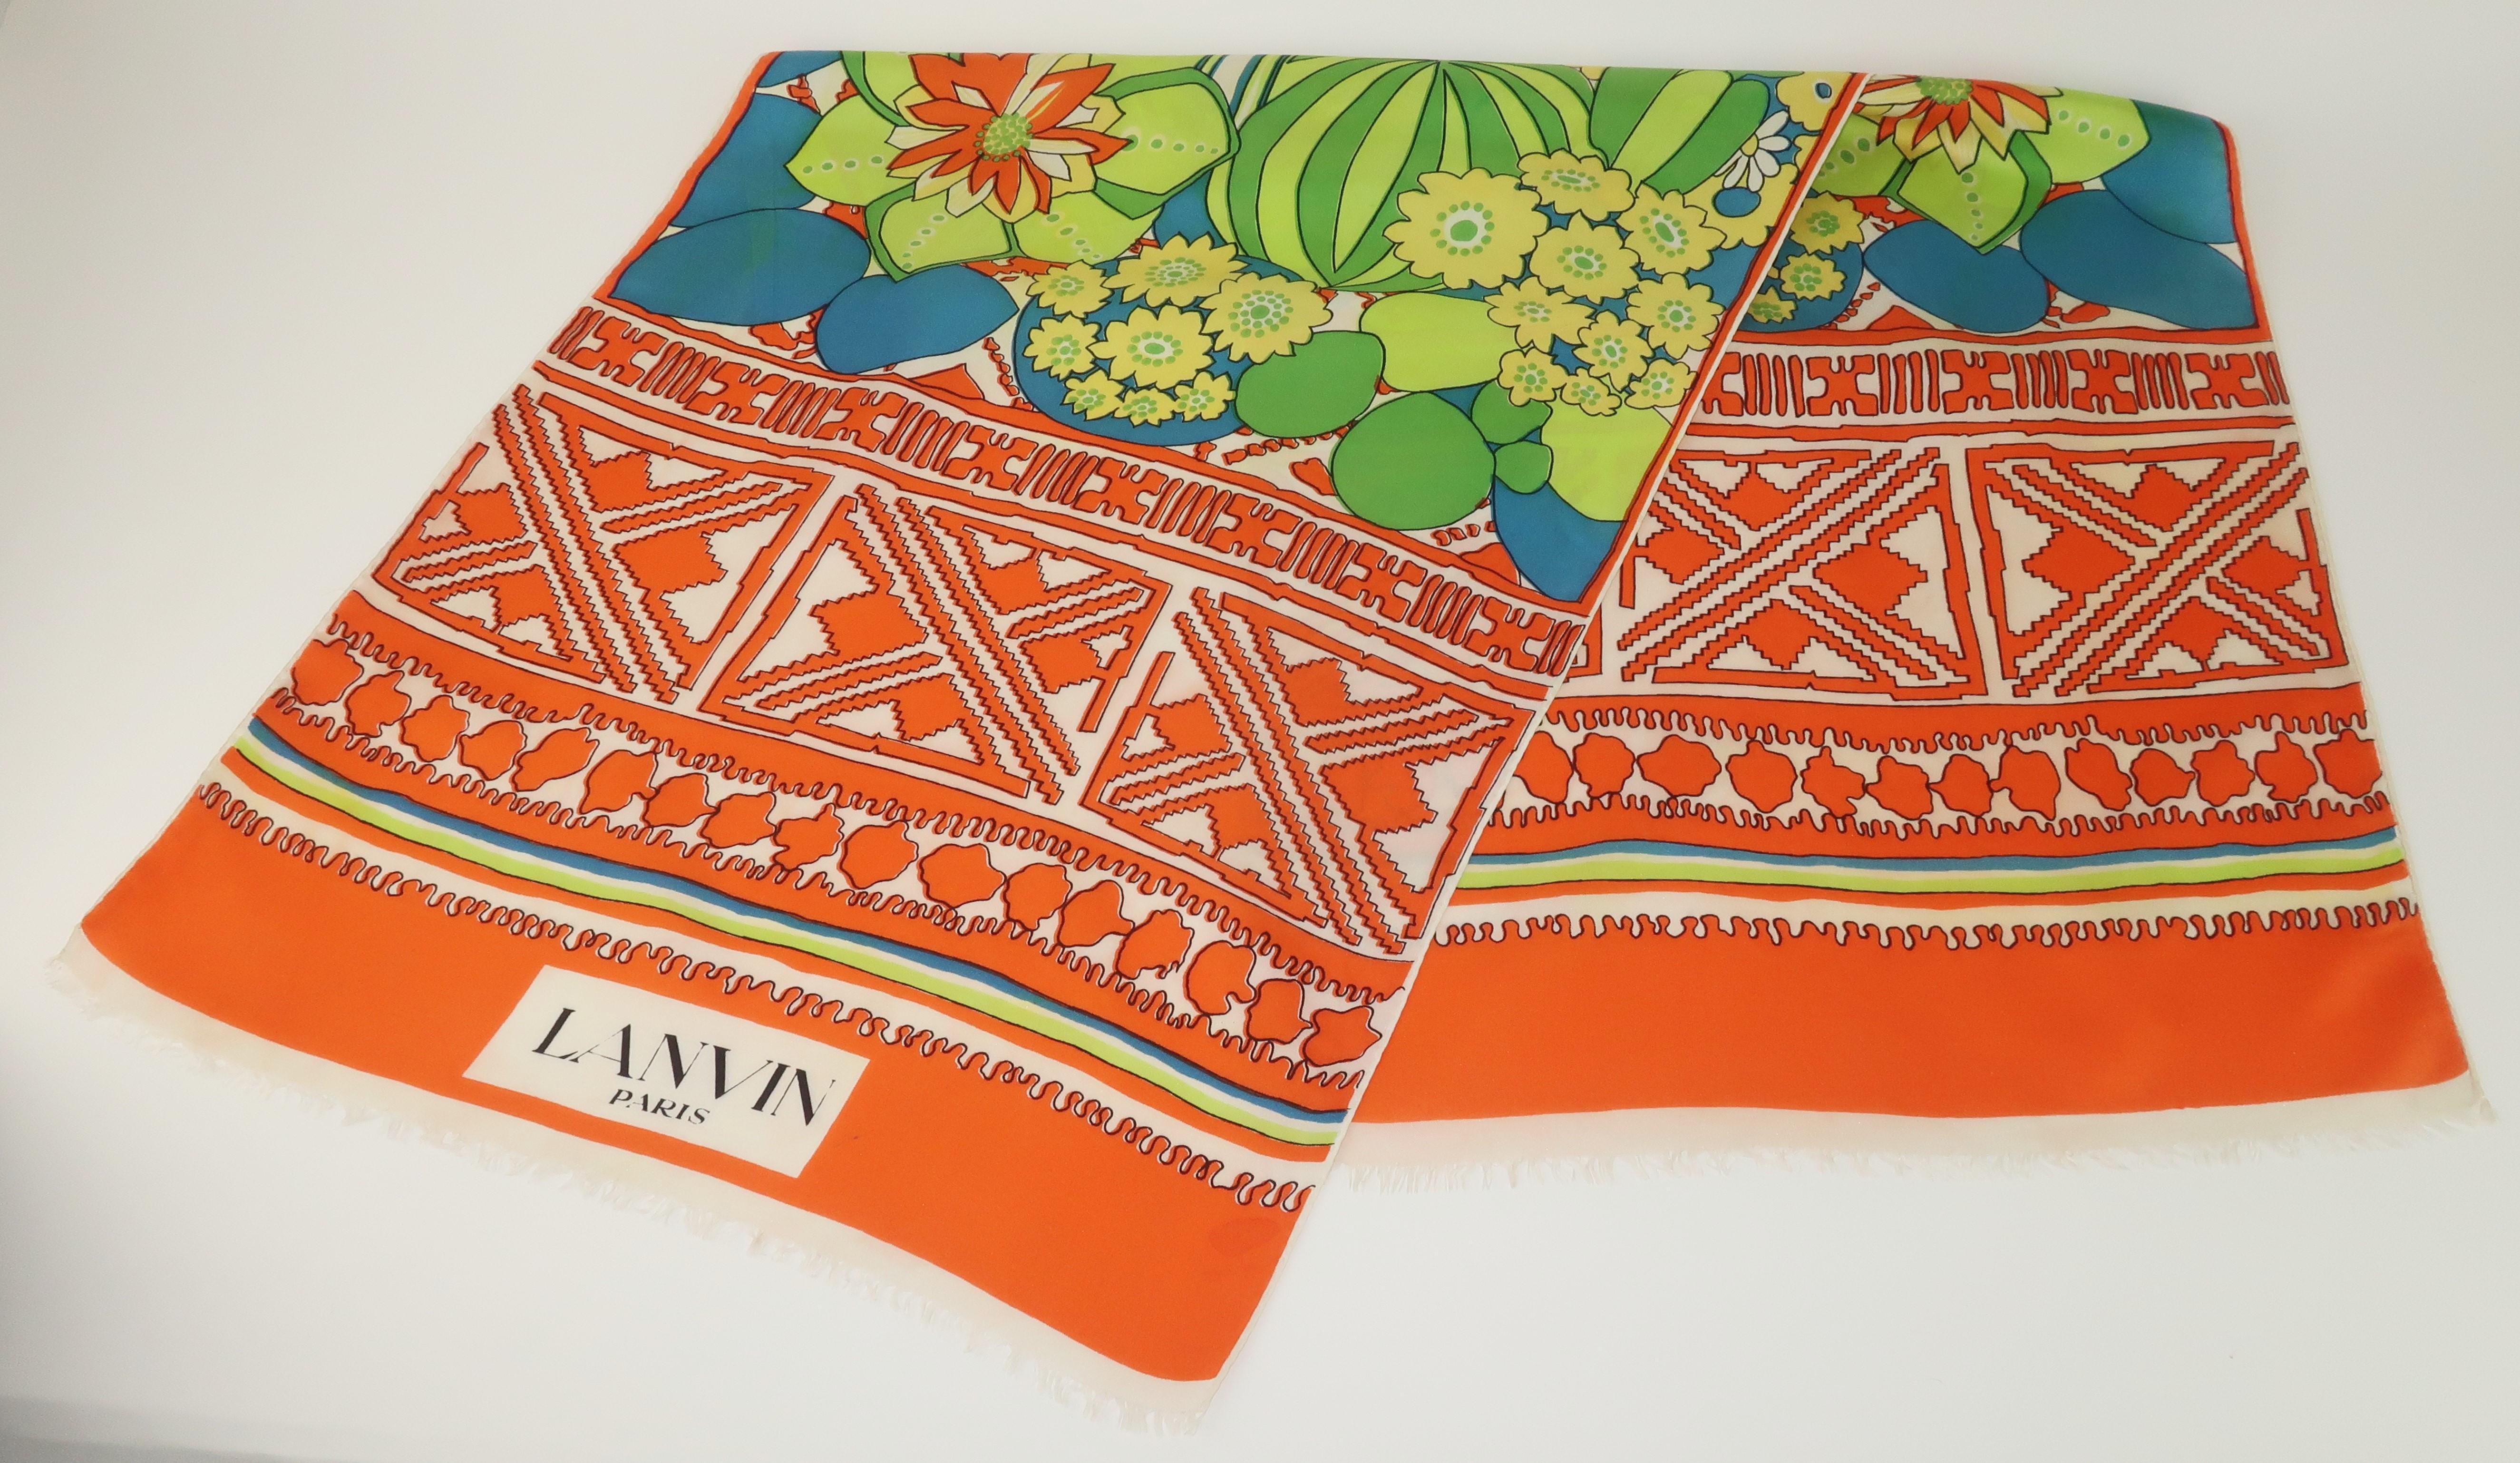 1960's Lanvin silk scarf in an extra long and dramatic length with a vibrant tropical print in shades of orange, green, chartreuse and aqua blue.  The edges are fringed and the floral pattern is framed by a graphic tribal style print.  'LANVIN